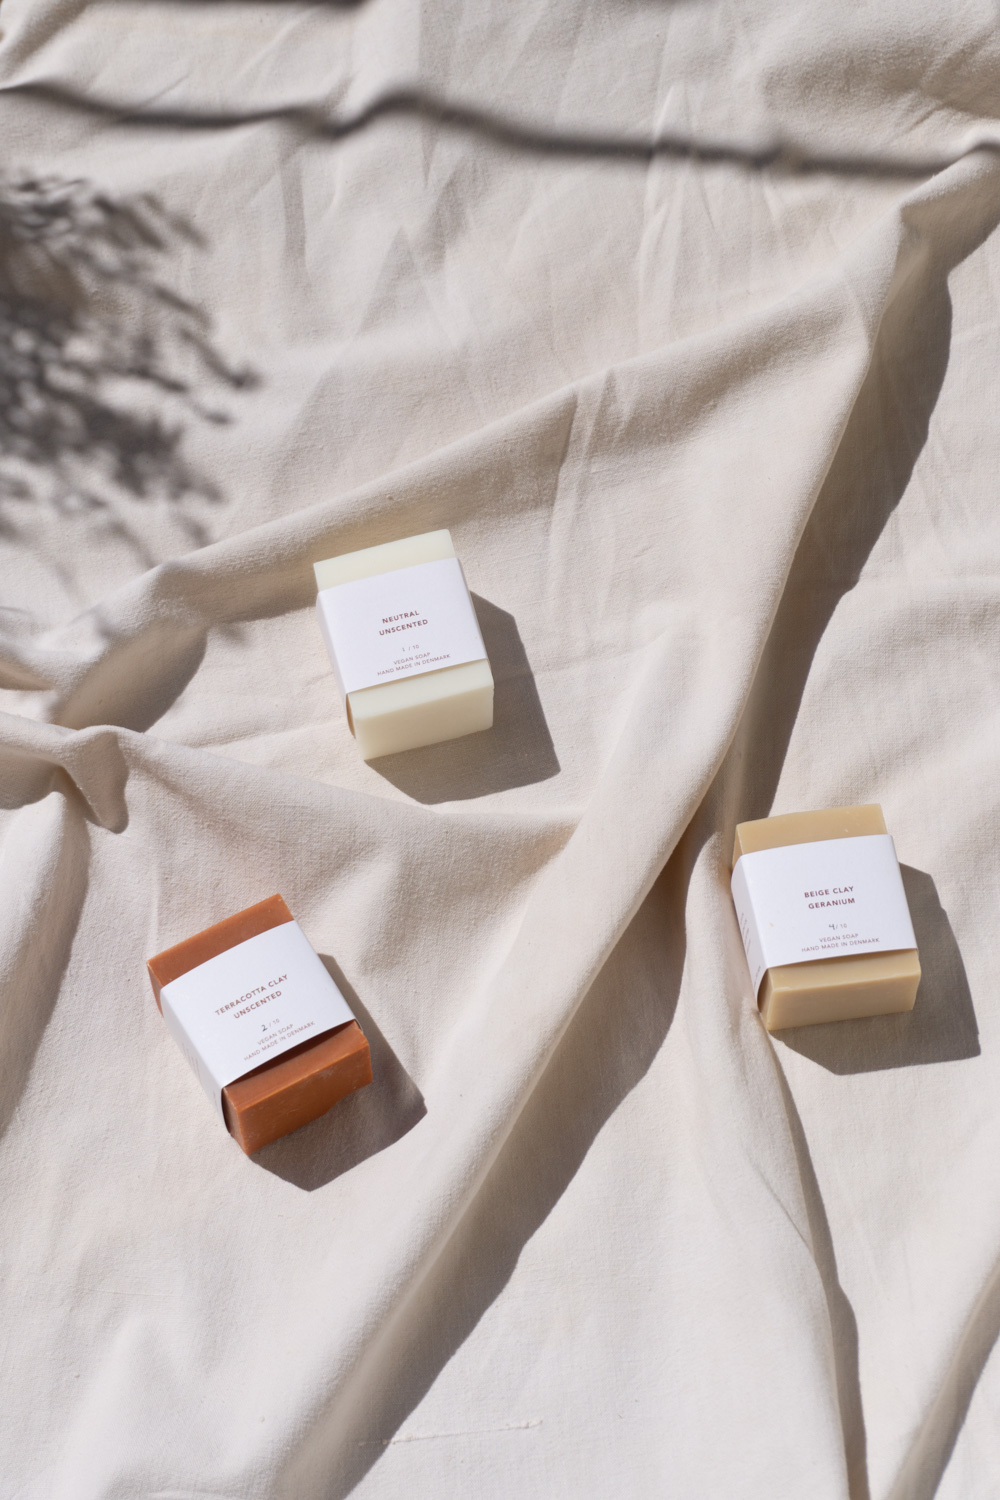 Mellow Mind - Natural Danish Skincare, Slow Living, Gua Sha Stone | Handmade Soaps, Light, Shadows, Shadow Play | Beauty Rituals, Natural Aesthetic, Product Photography, RG Daily Blog